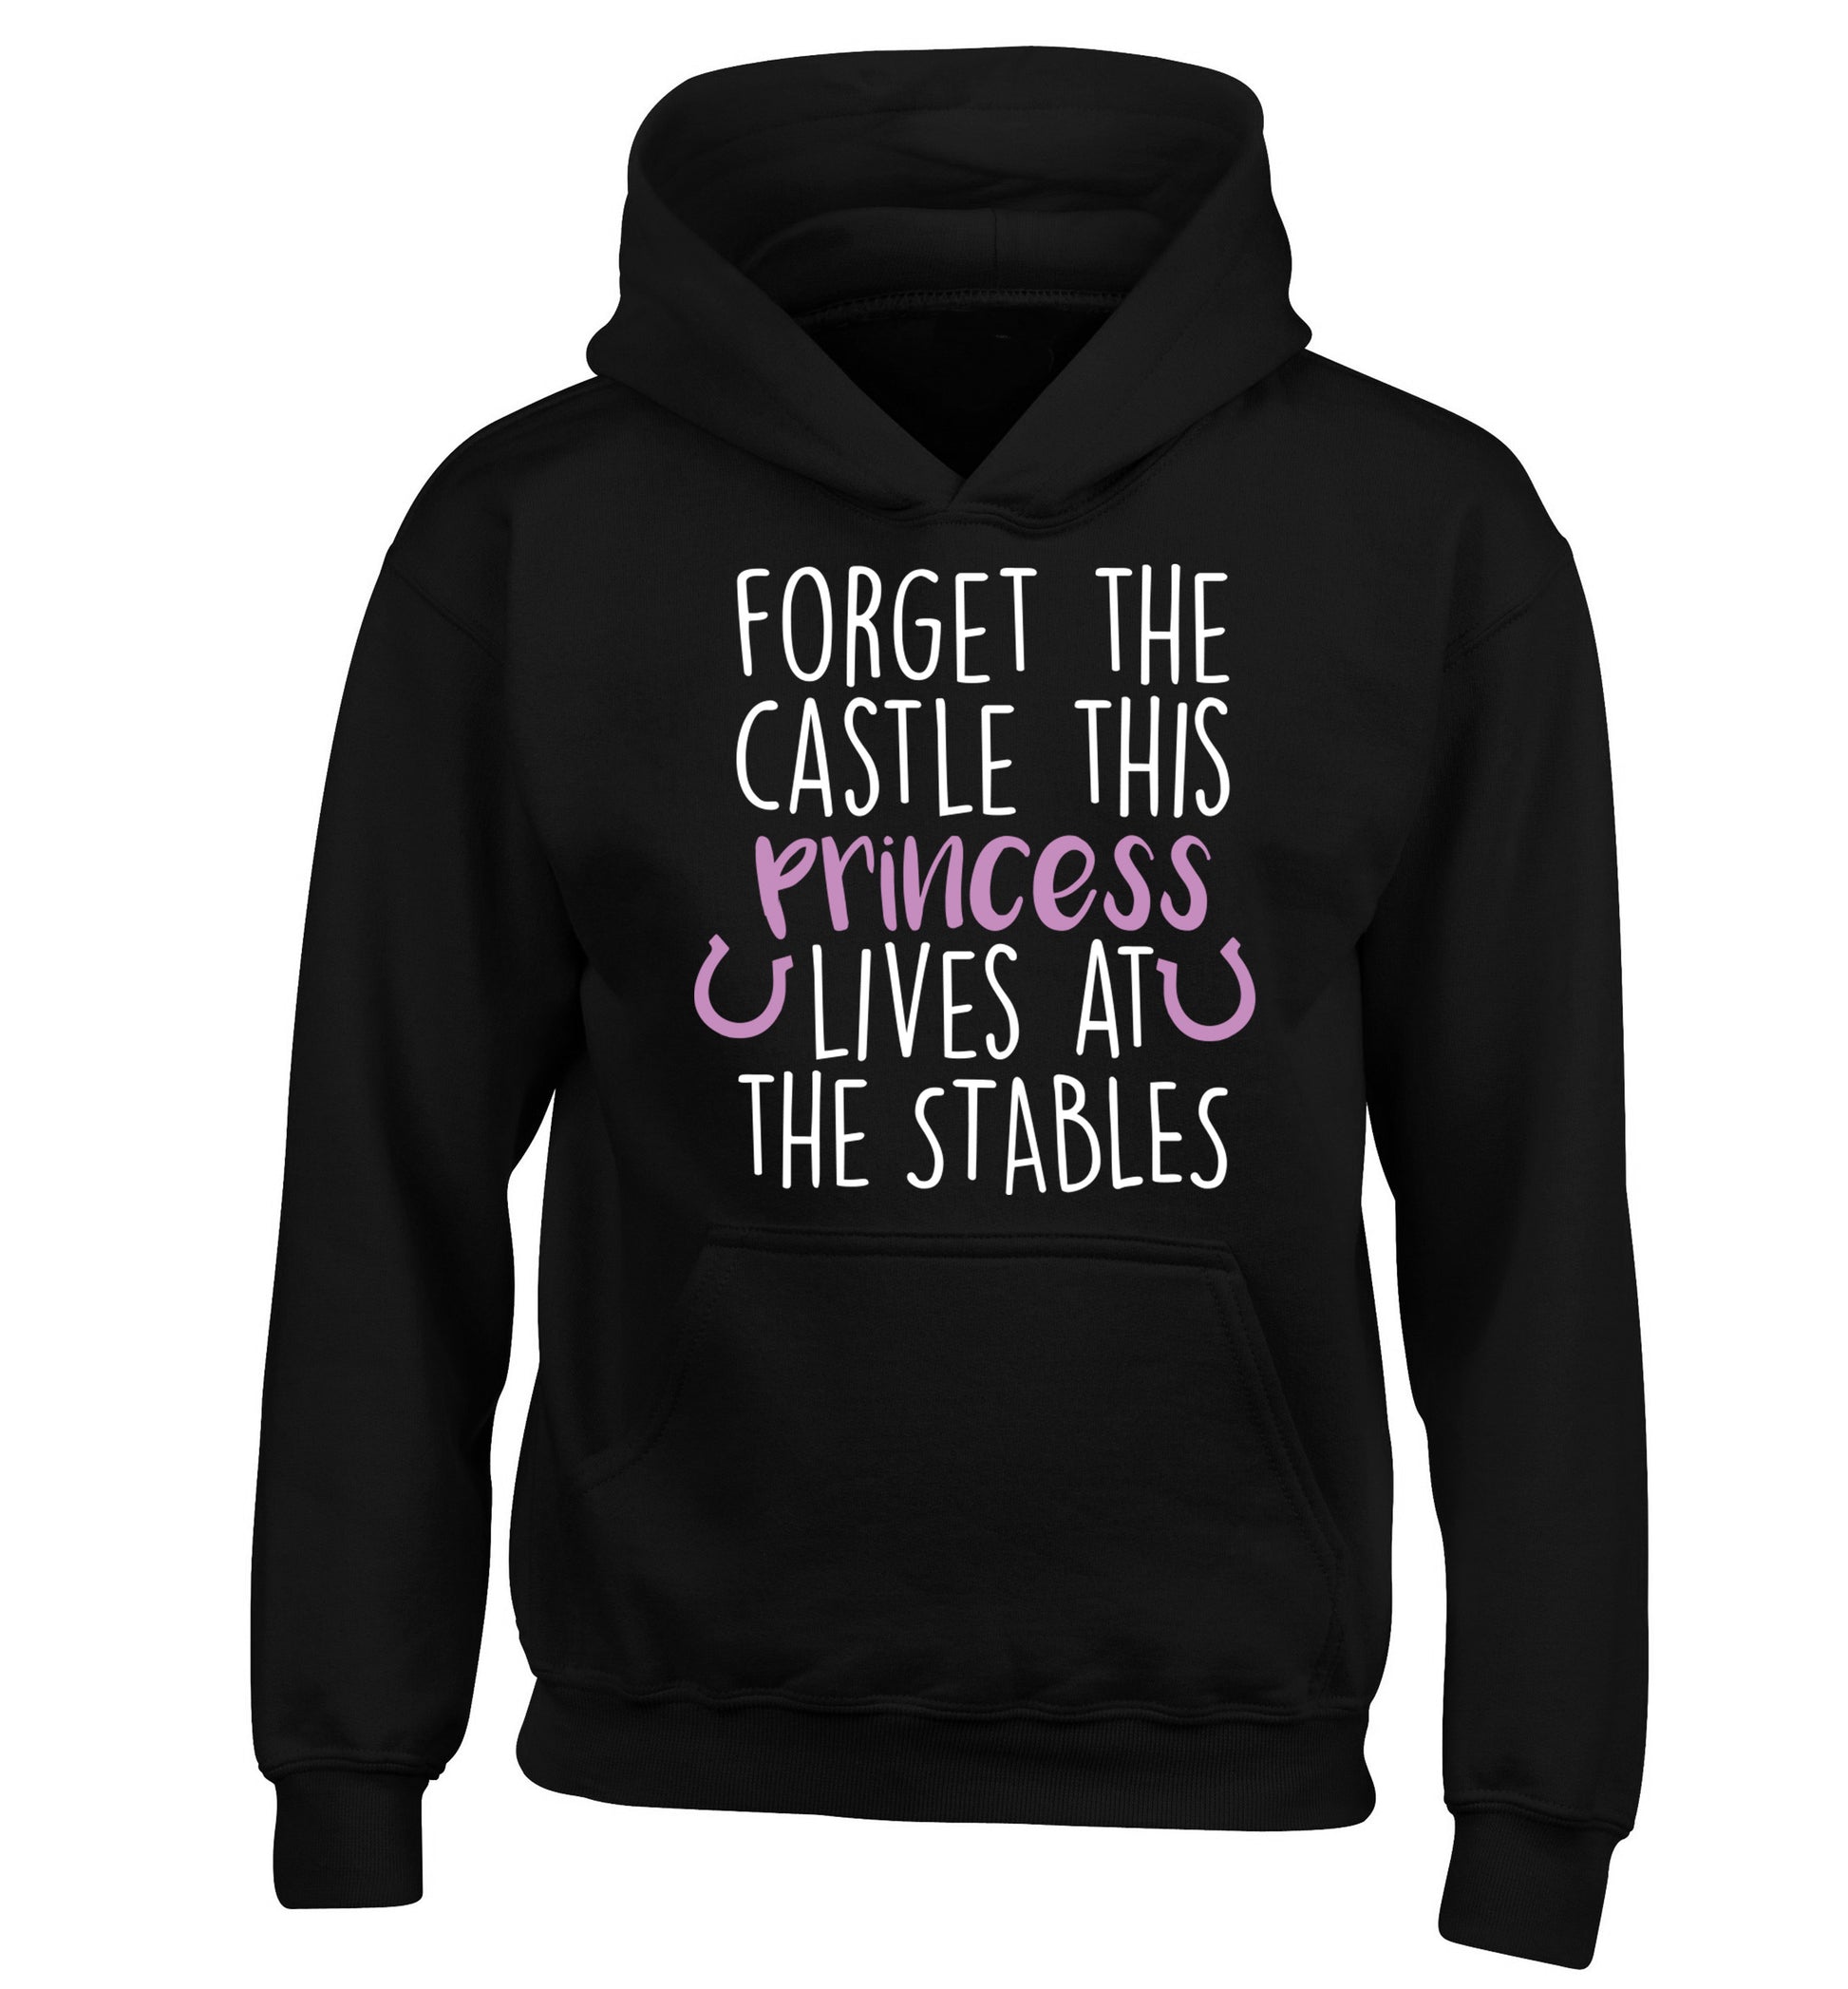 Forget the castle this princess lives at the stables children's black hoodie 12-14 Years